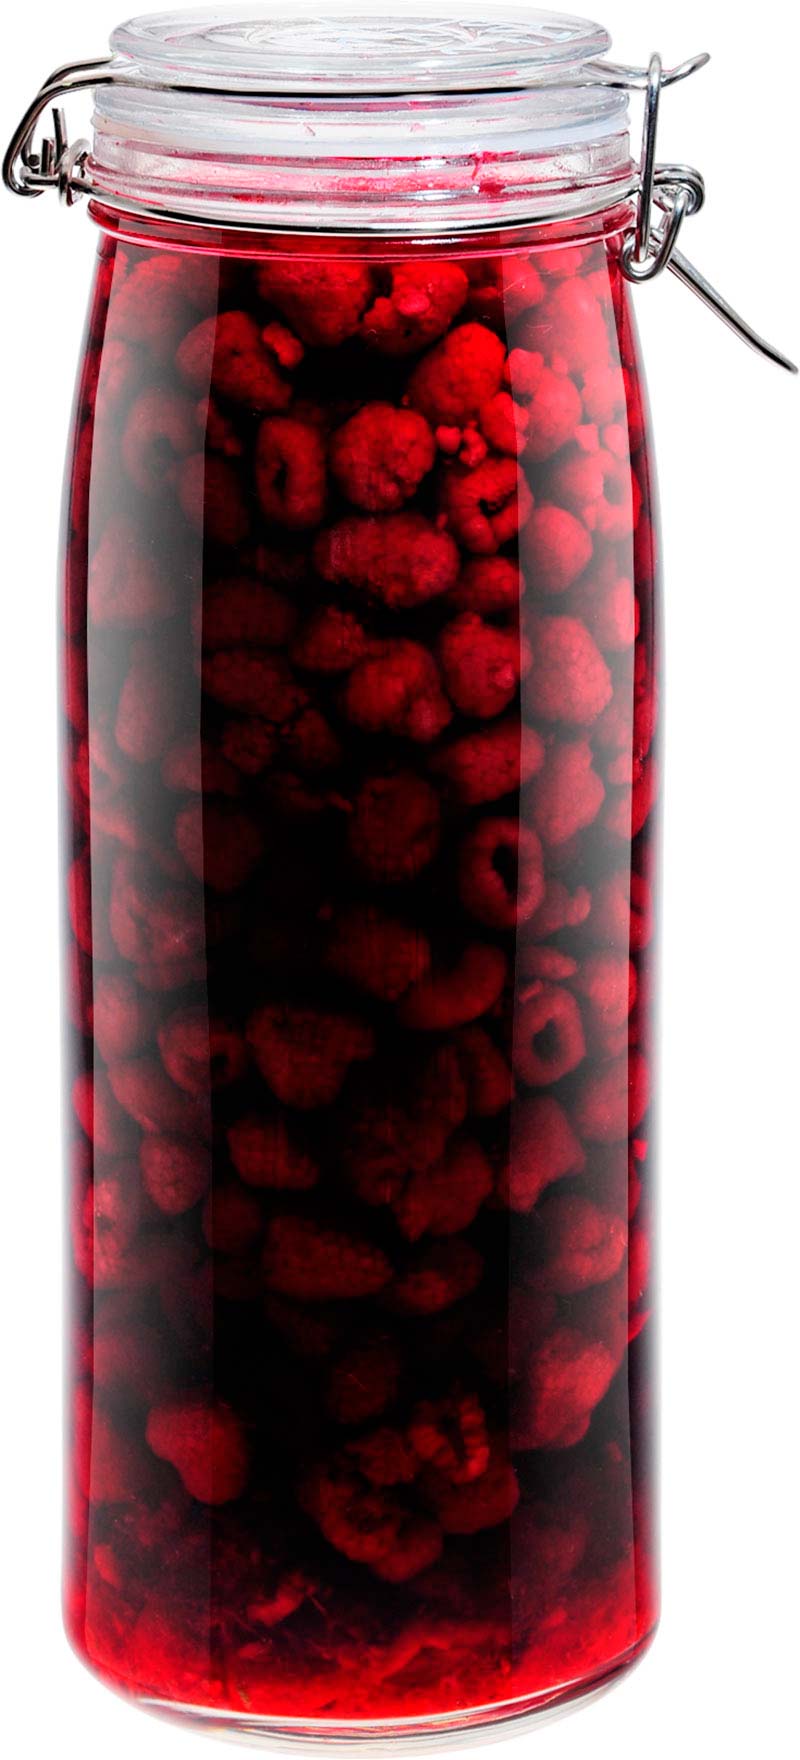 How to Make the Raspberry-infused Gin